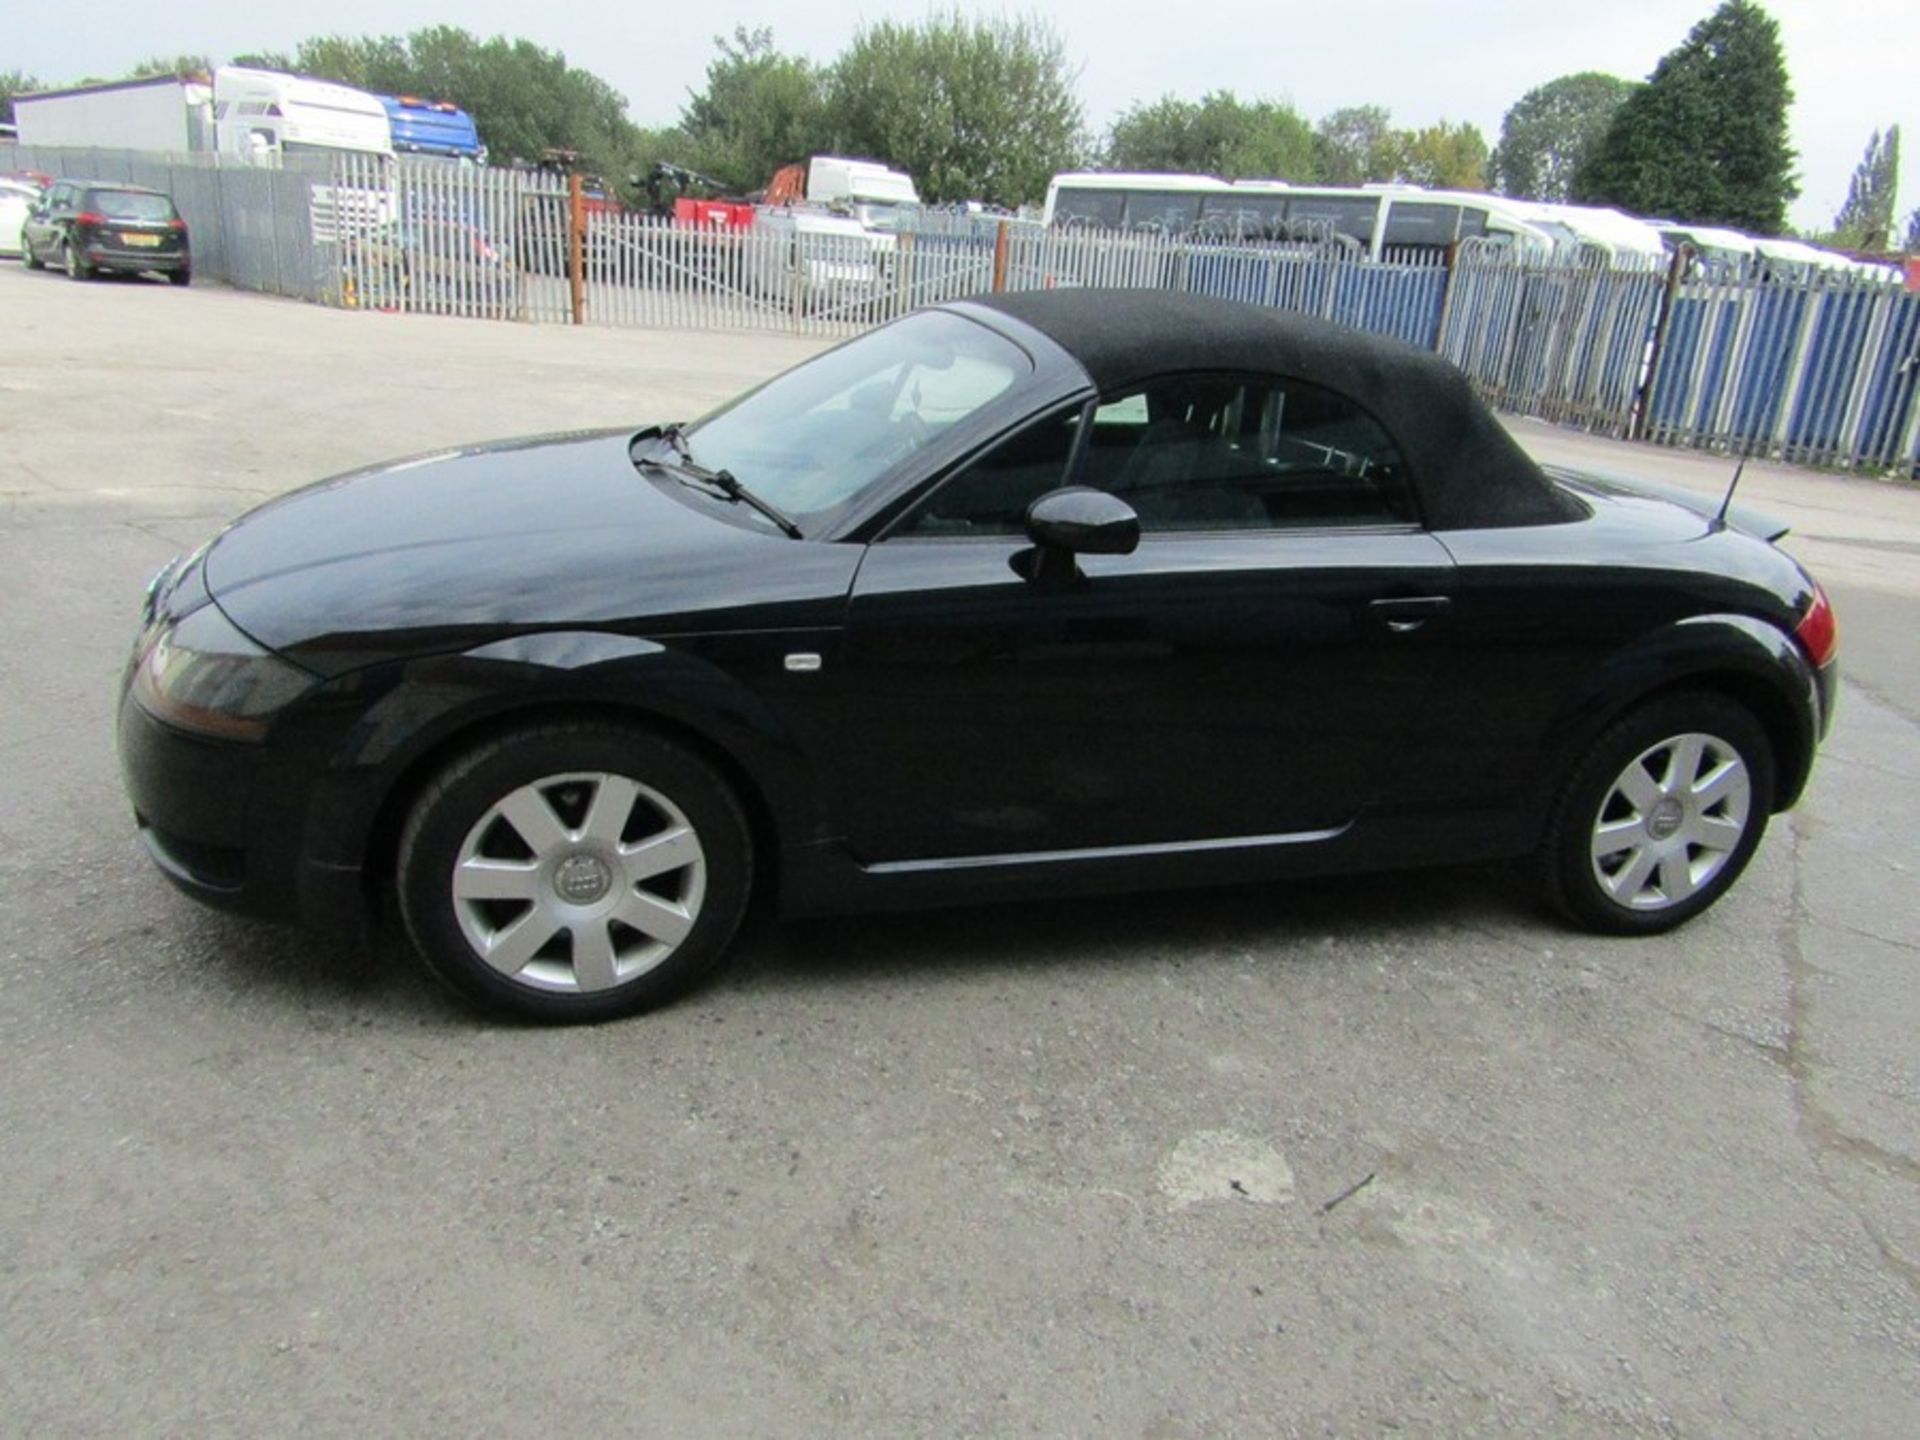 2005 Audi 1.8i Convertible roadster, 131,608 Miles (unchecked) MOT until 01/06/2021, Has part - Image 15 of 16